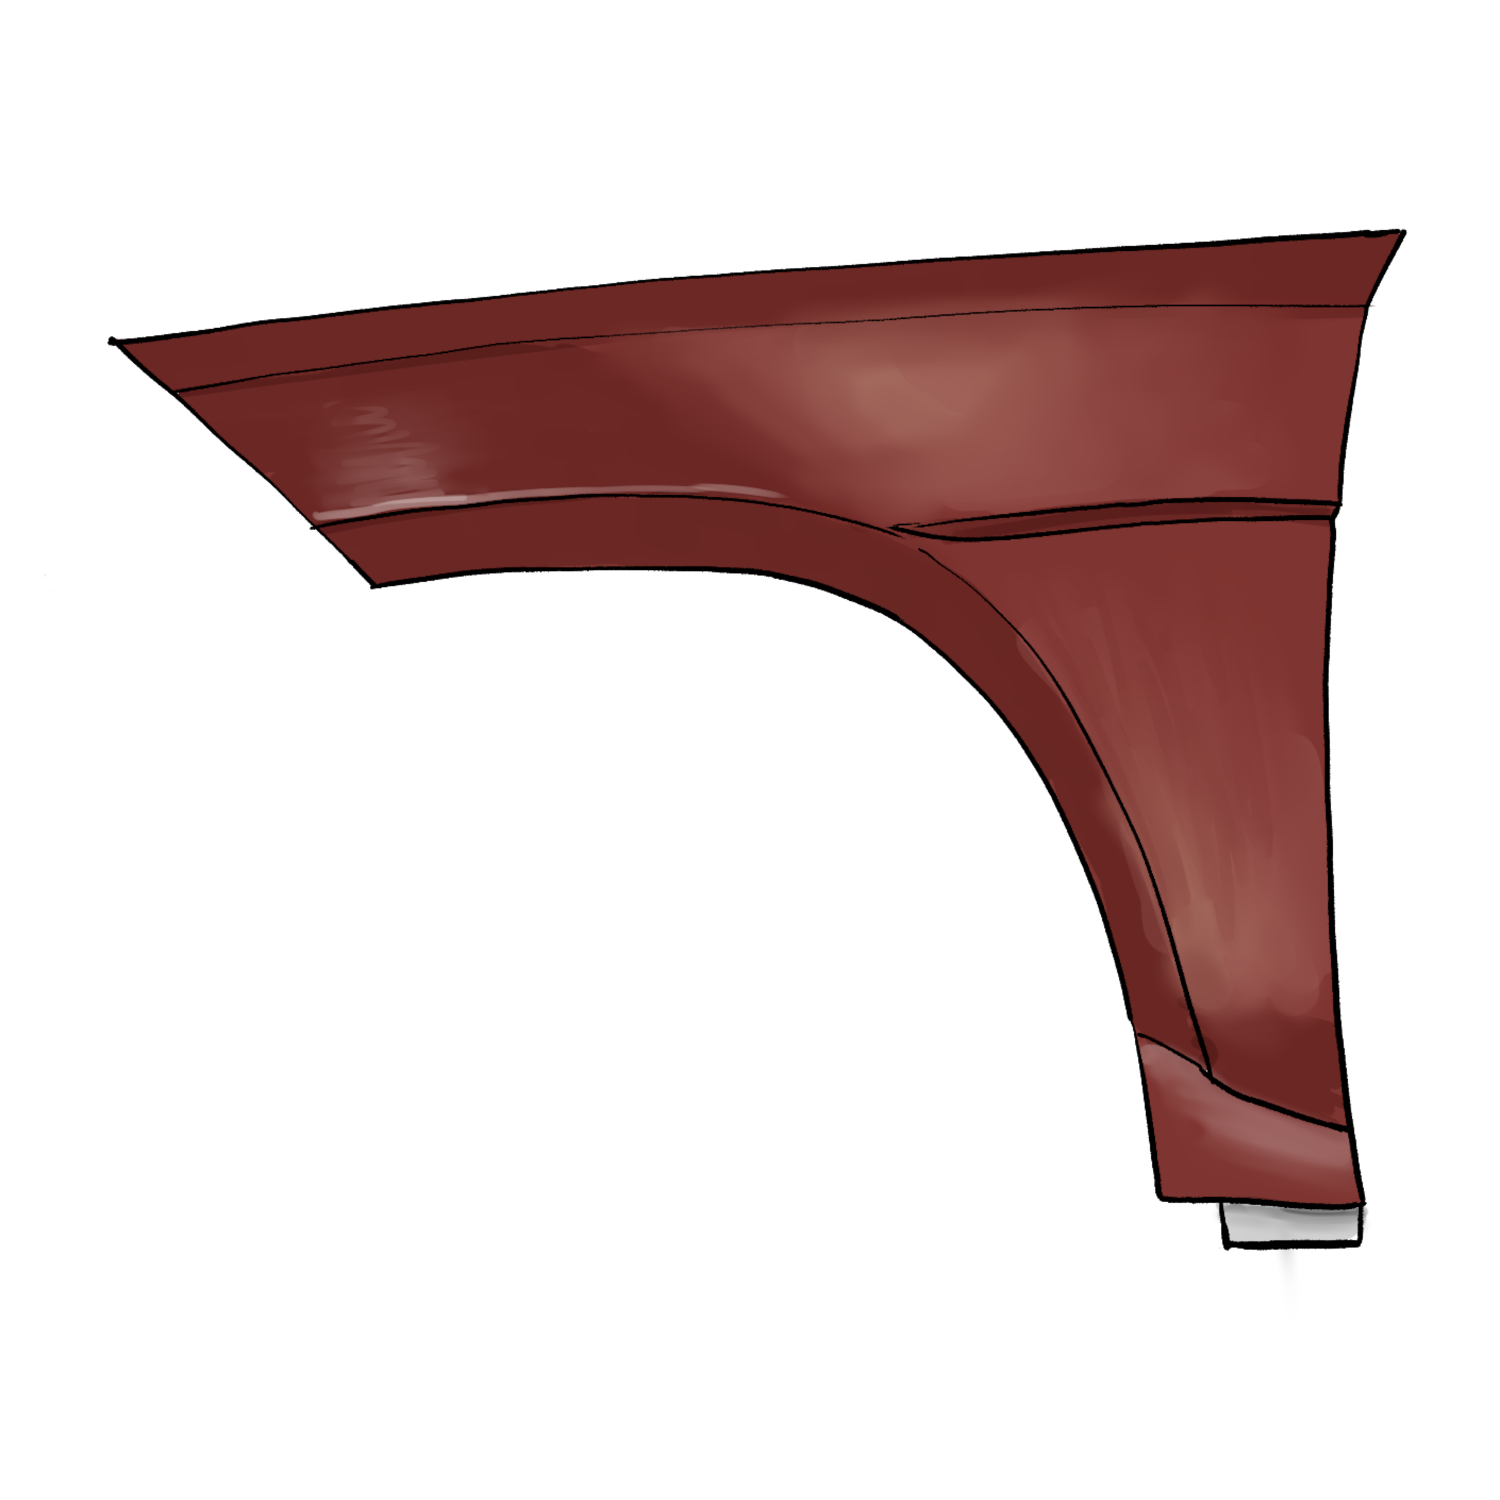  Product image 1 of the product “Mudguard OX5 ”